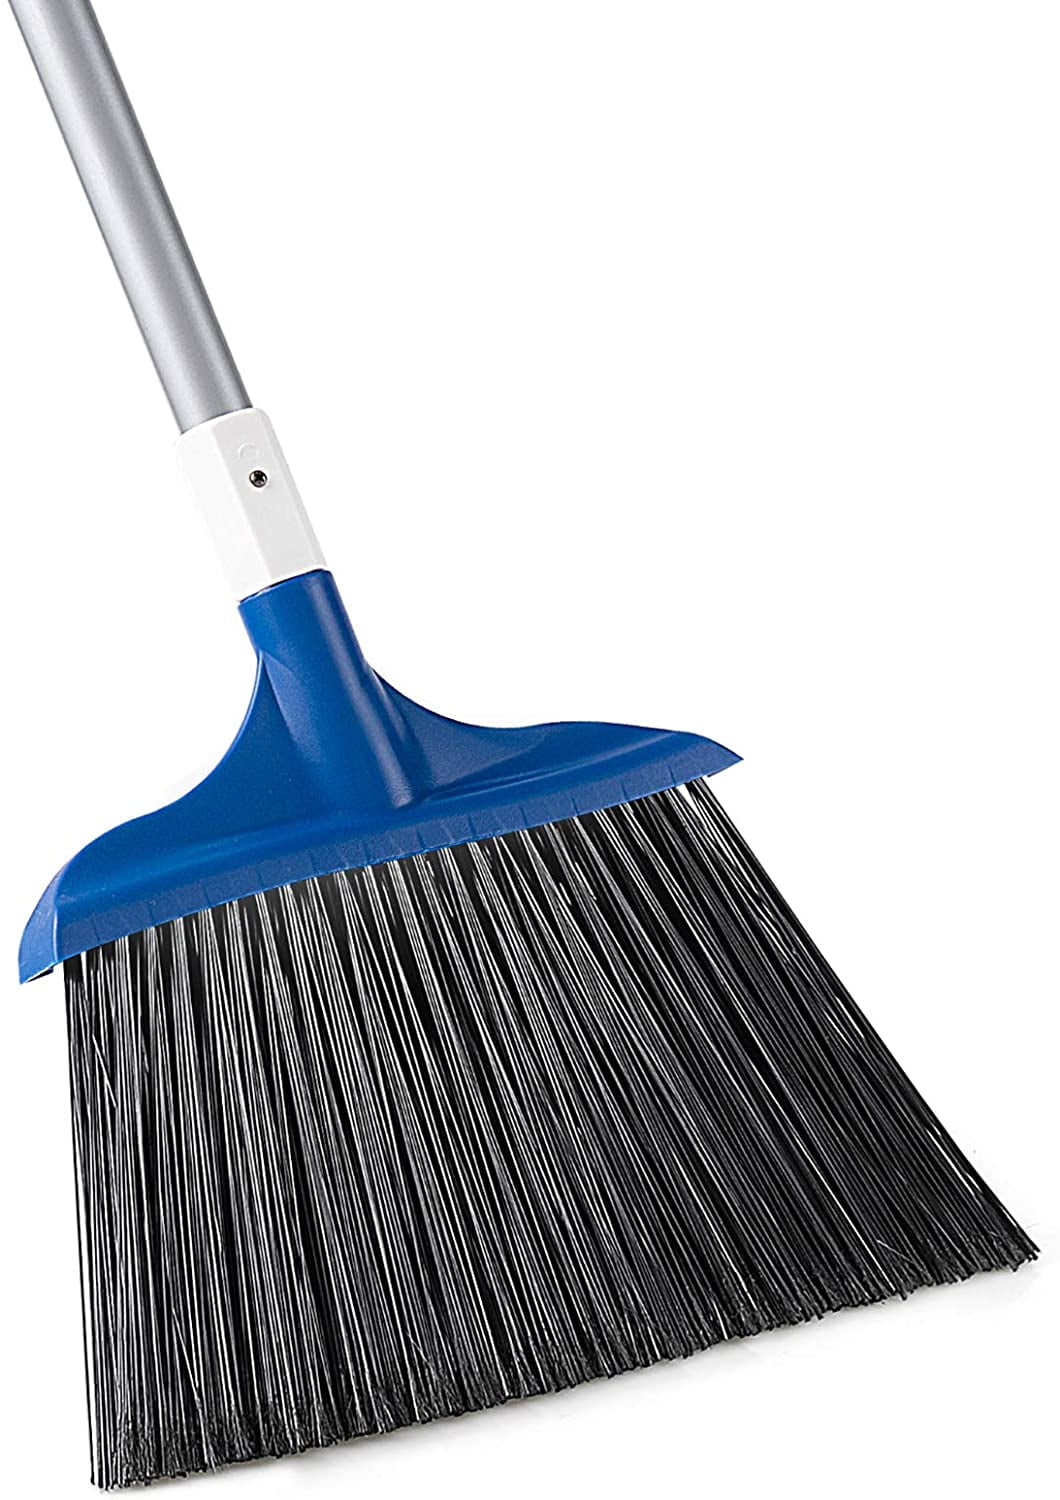 Renewed 15 Width 55 Length Black/Red Libman Commercial 997 Wide Commercial Angle Broom Pack of 6 